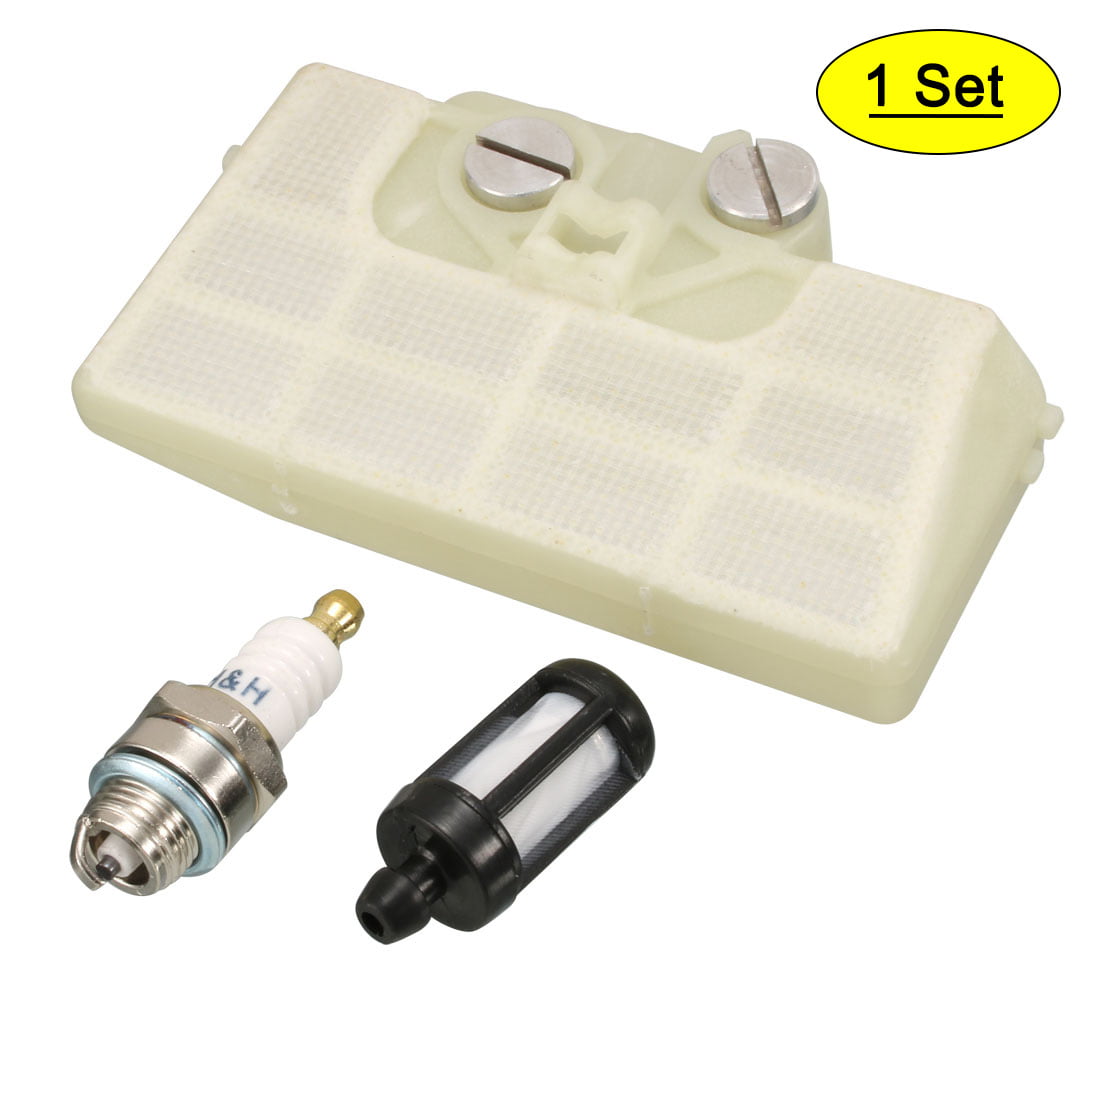 Fuel/Oil Line Filter for STHIL 029 039 MS290 MS310 MS390 Chainsaw Spark Plug Hipa Air Filter